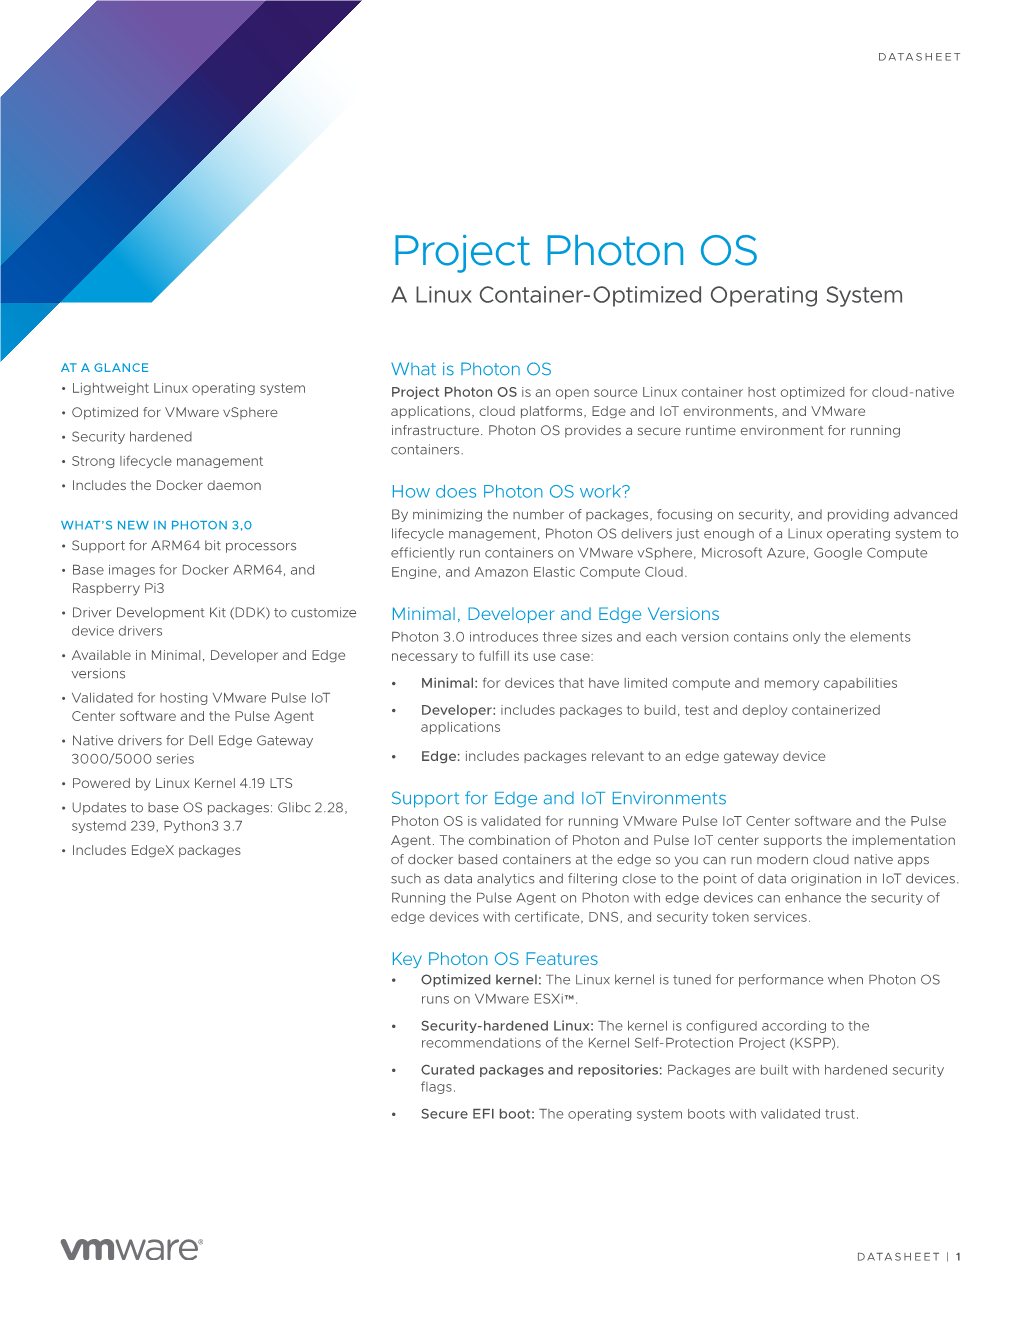 Project Photon OS a Linux Container-Optimized Operating System